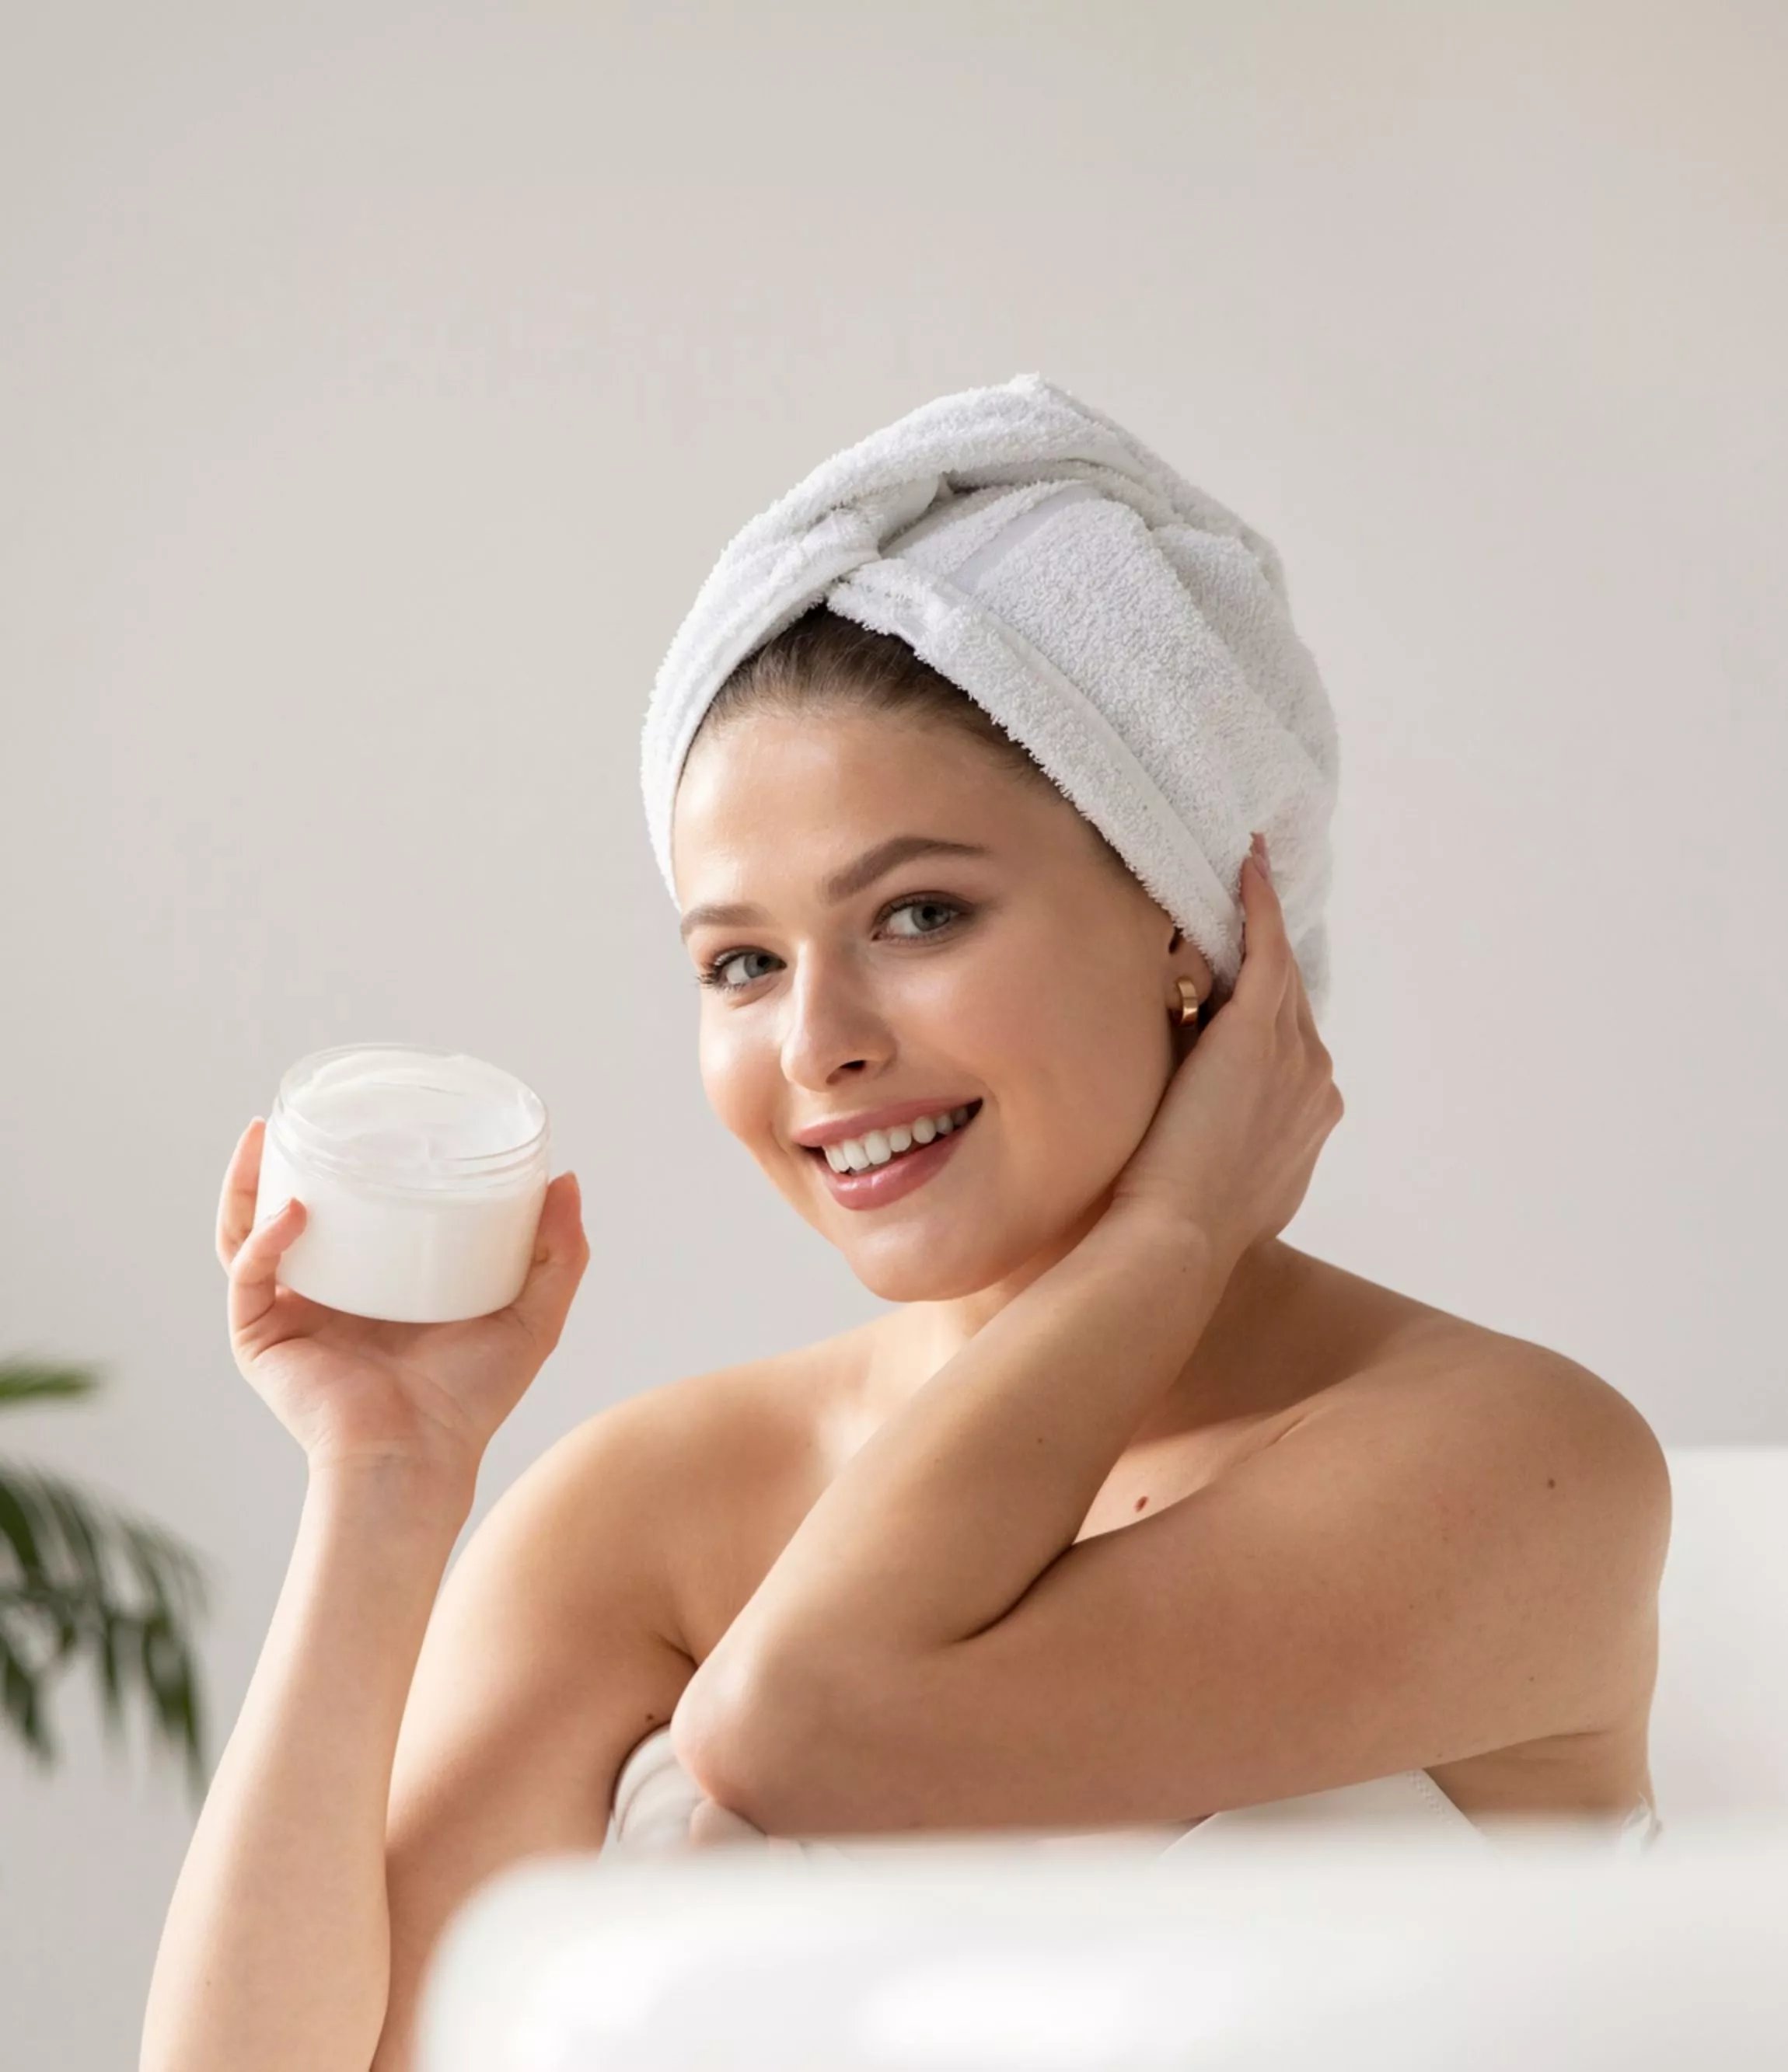 girl in the bathroom with a towel on her head and a jar of cream in her hands